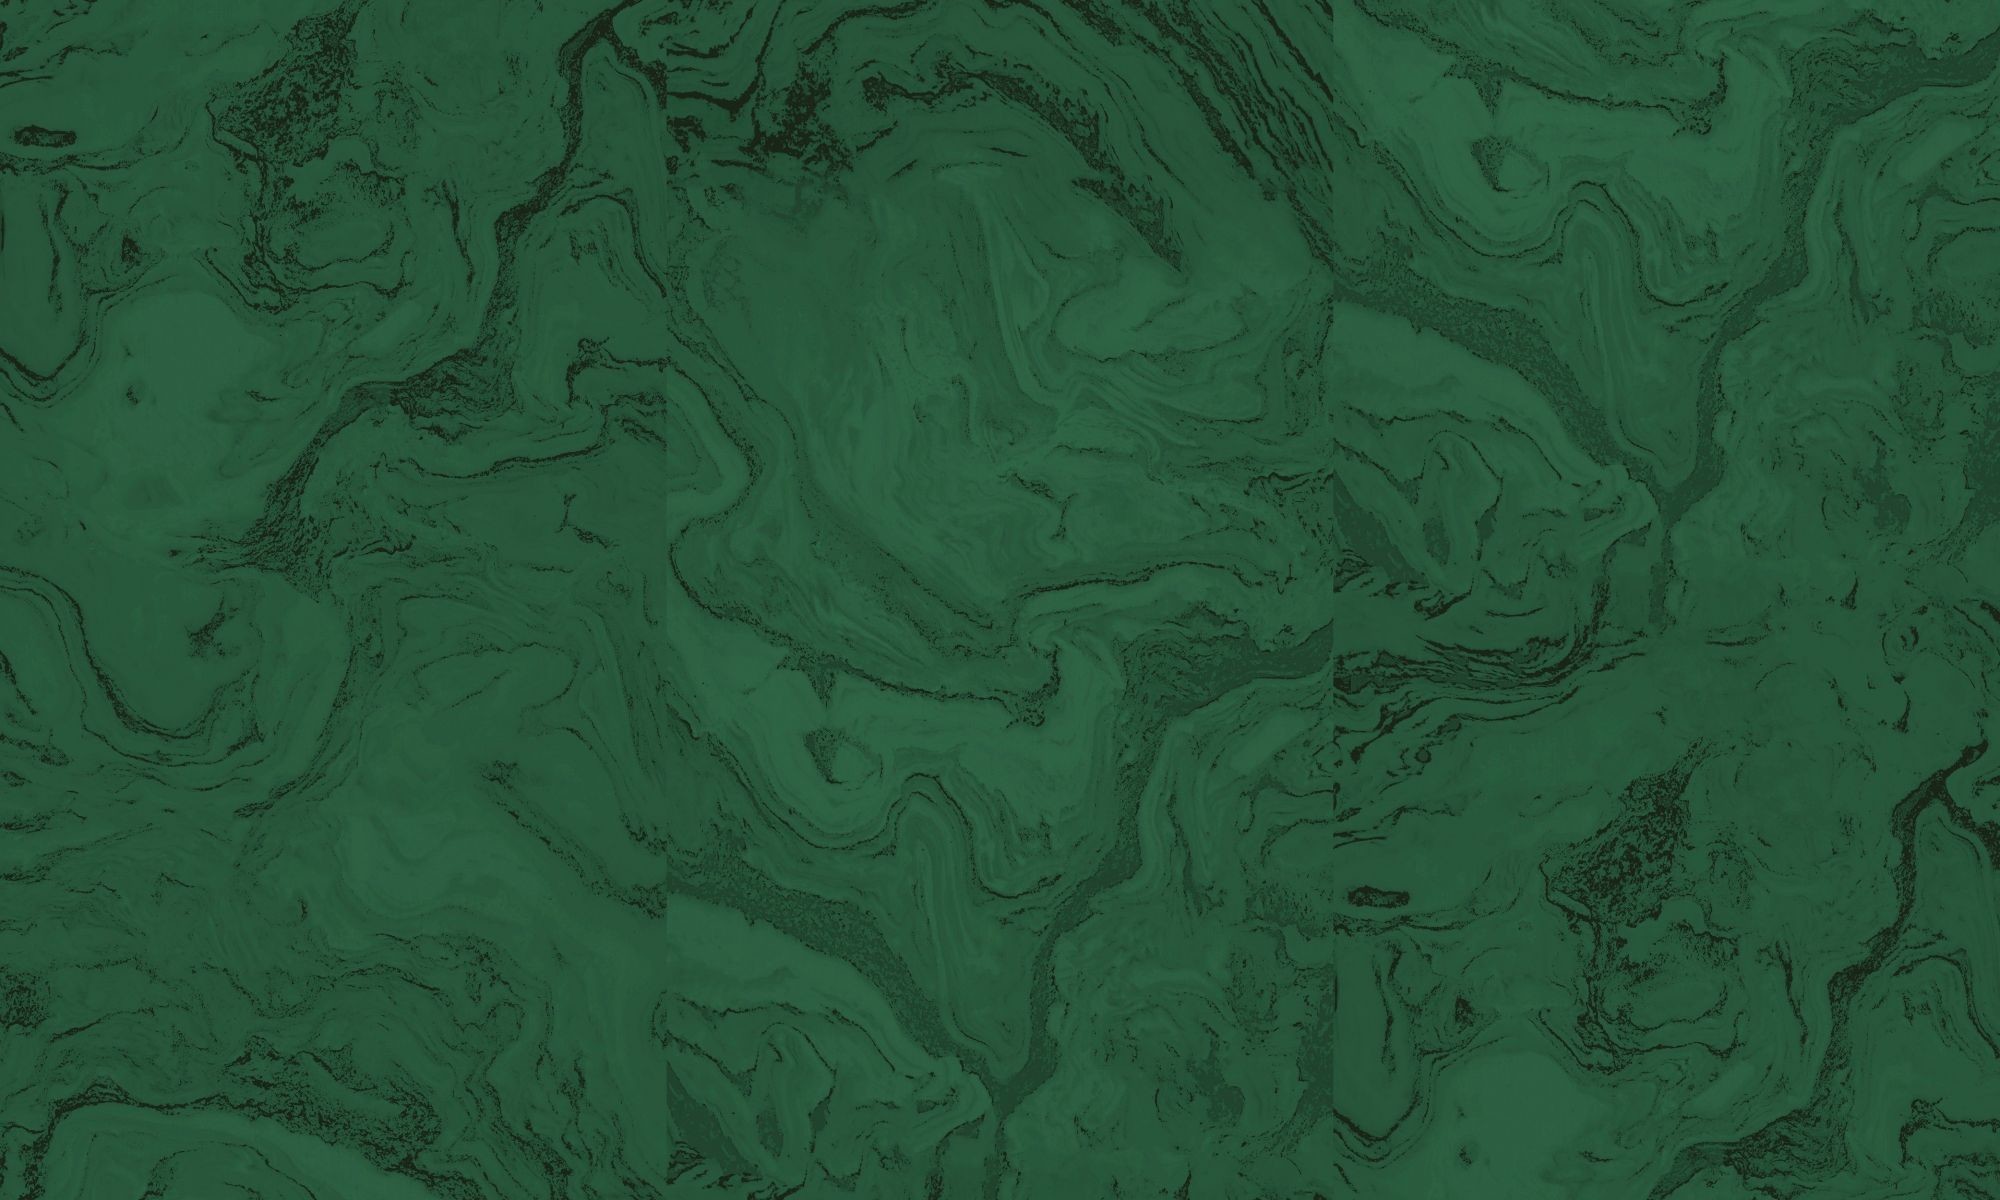 2000x Slytherin iPhone Wallpaper New Green Marble 7 Wallpaper Marble Green